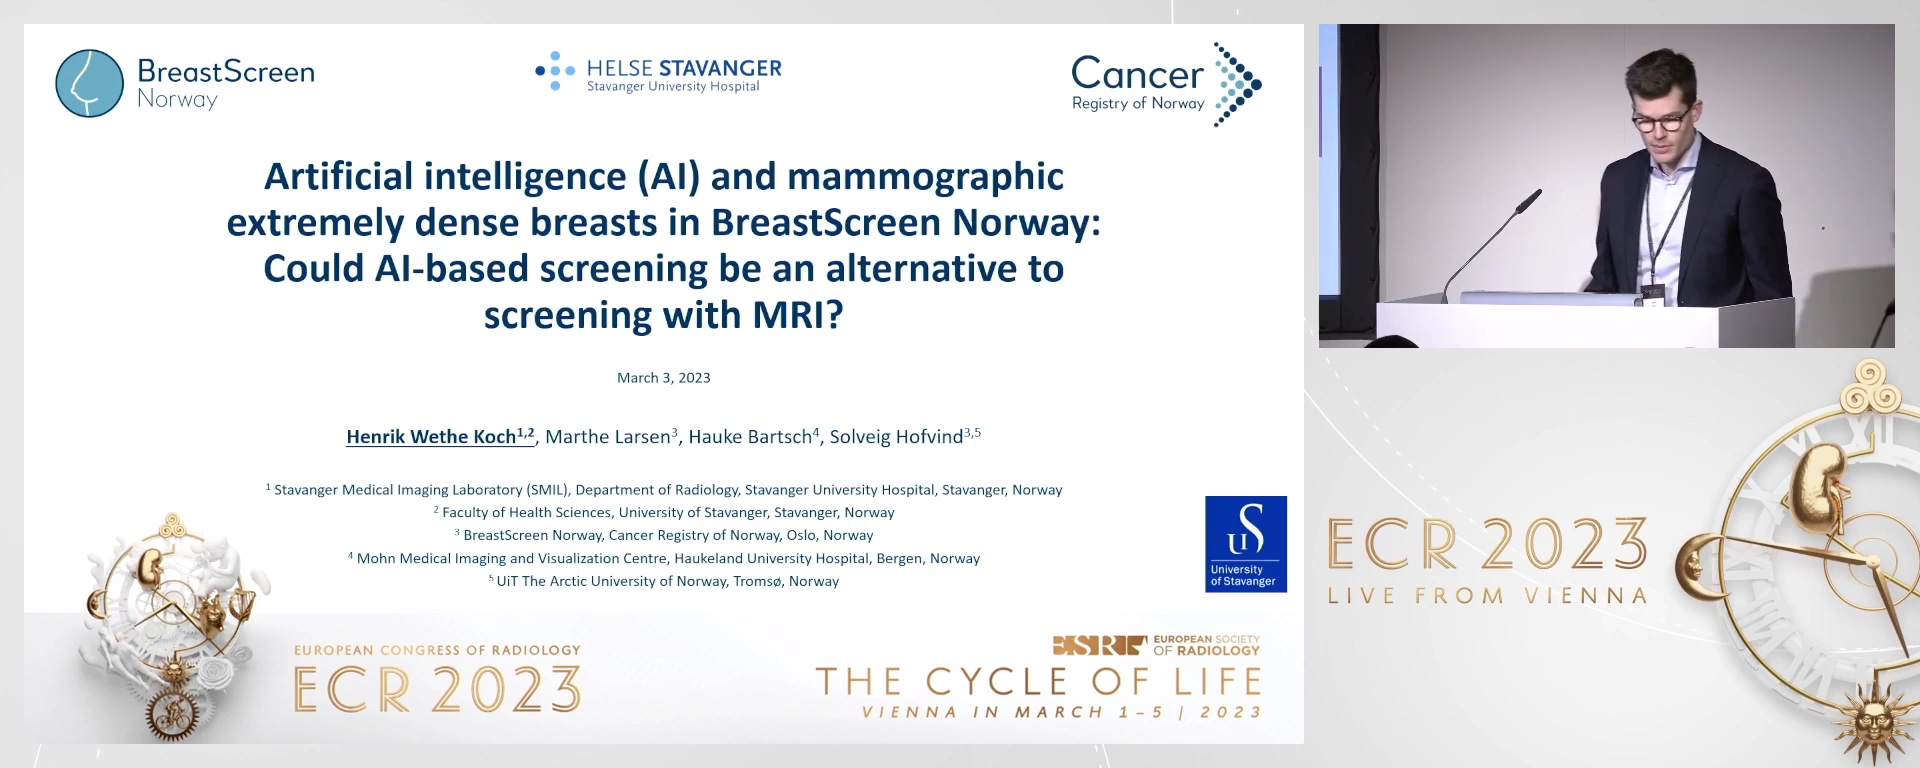 Artificial intelligence (AI) and mammographic extremely dense breasts in BreastScreen Norway: could AI-based screening be an alternative to screening with MRI? - Henrik Wethe Koch, Stavanger / NO